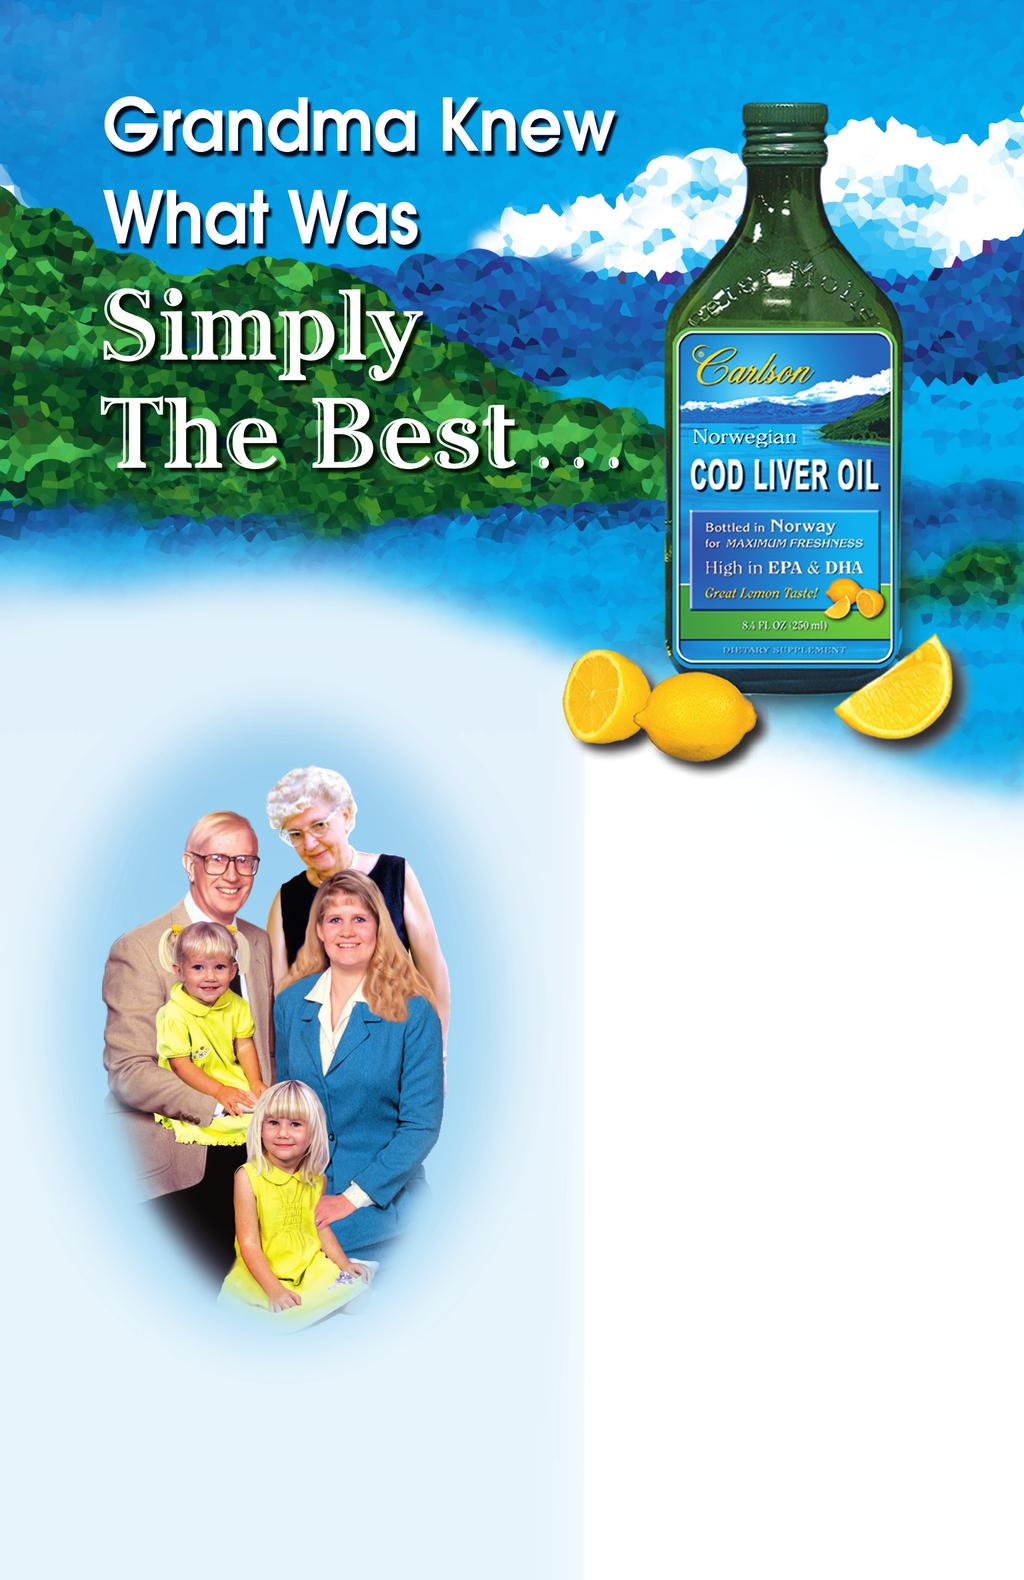 Generations of families have known the healthy benefits of Cod Liver Oil. Now, Carlson offers simply the best... pure and fresh from the clean arctic waters, far off the coast of Norway.